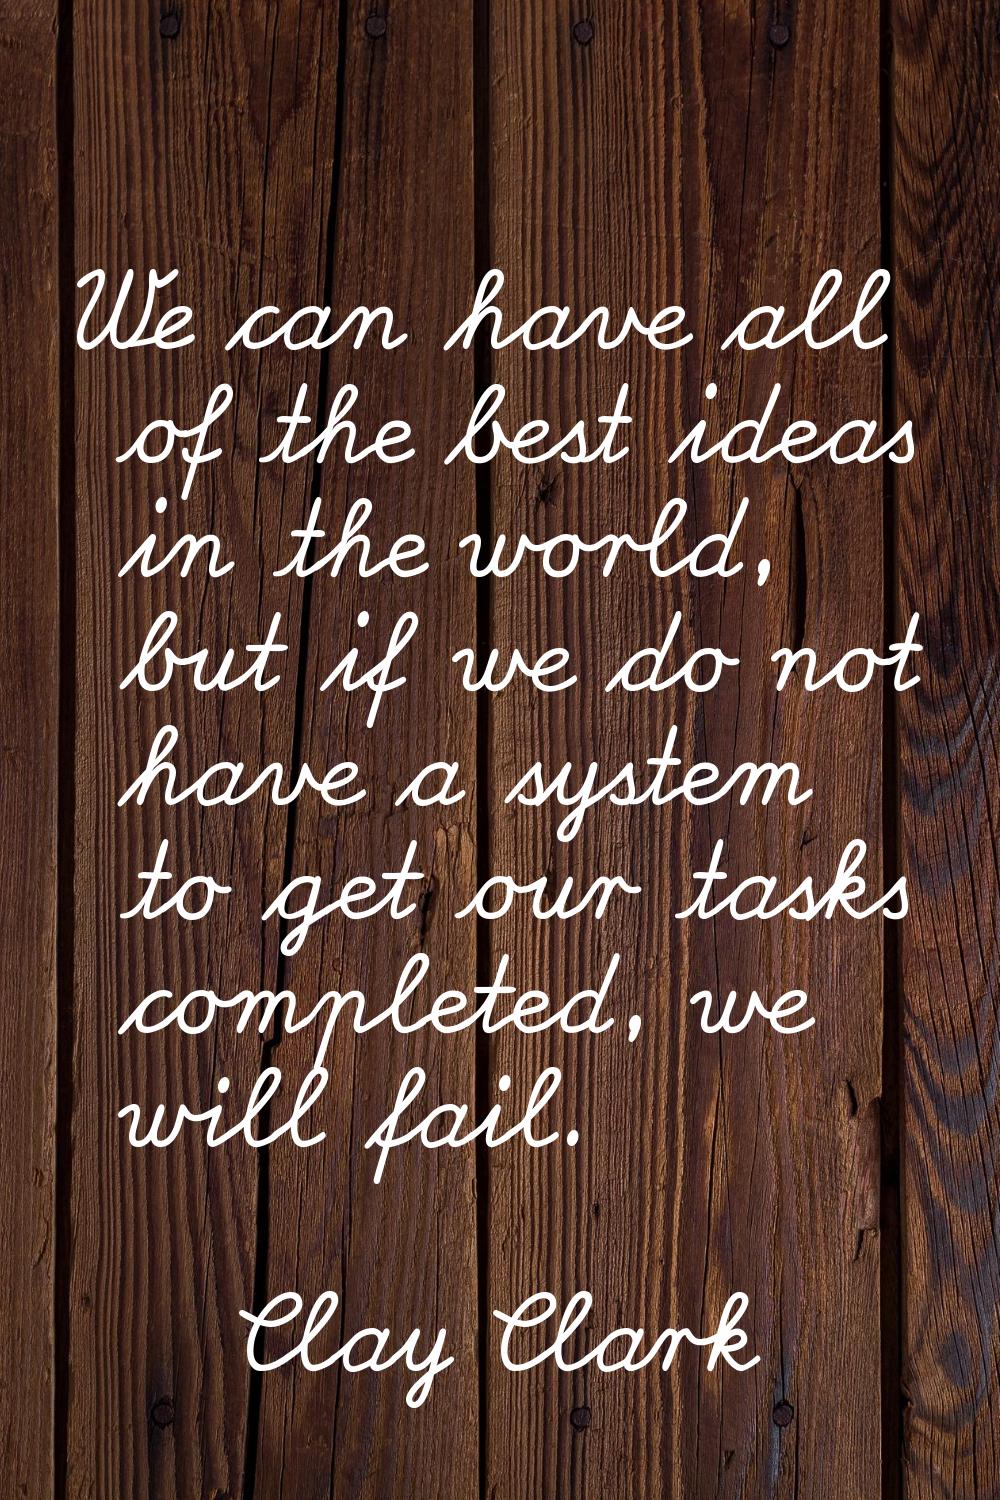 We can have all of the best ideas in the world, but if we do not have a system to get our tasks com